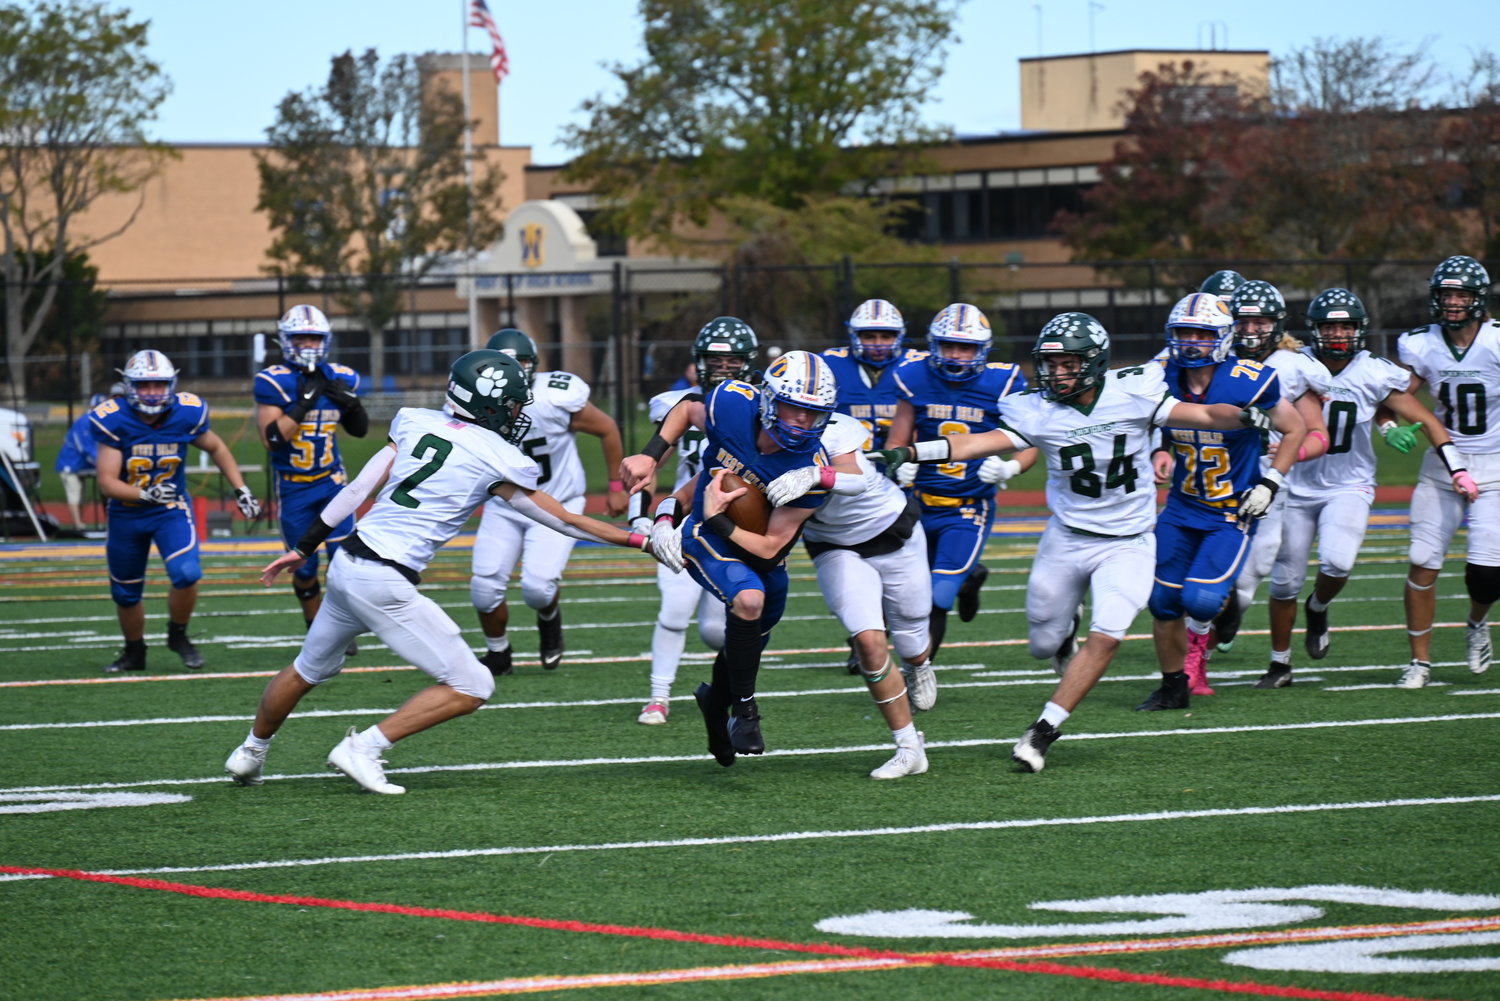 West Islip’s Patrick Keenan runs the ball against Lindenhurst during the Lions’ homecoming game on October 8. West Islip fell to the Bulldogs 7-13.